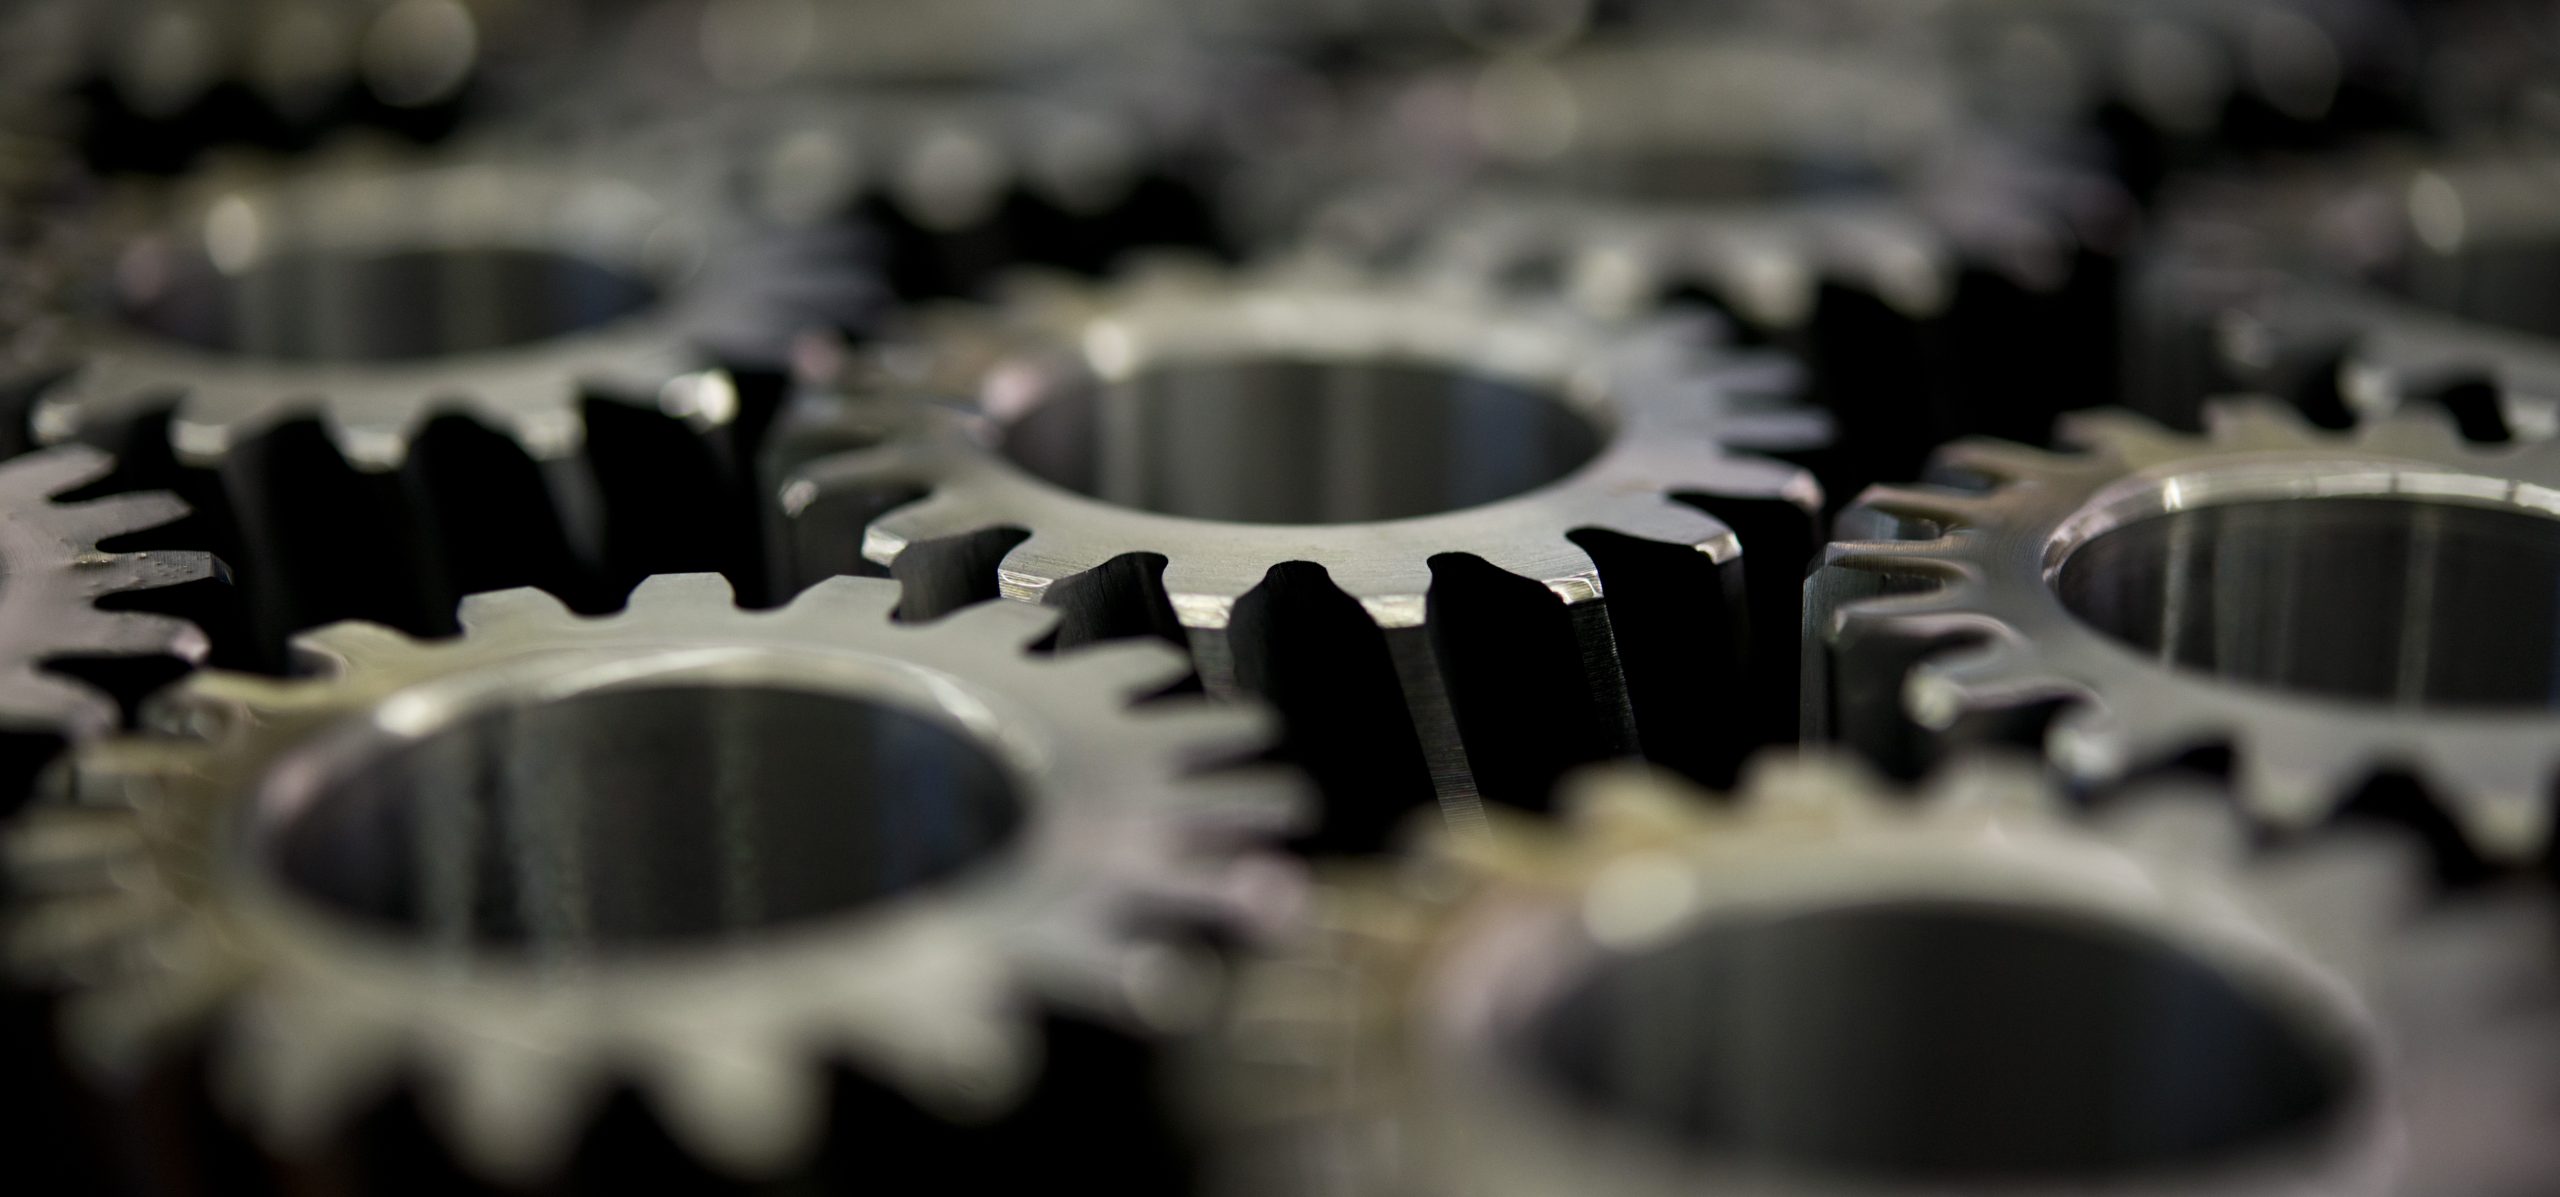 Gear production capabilities at Gear Motions